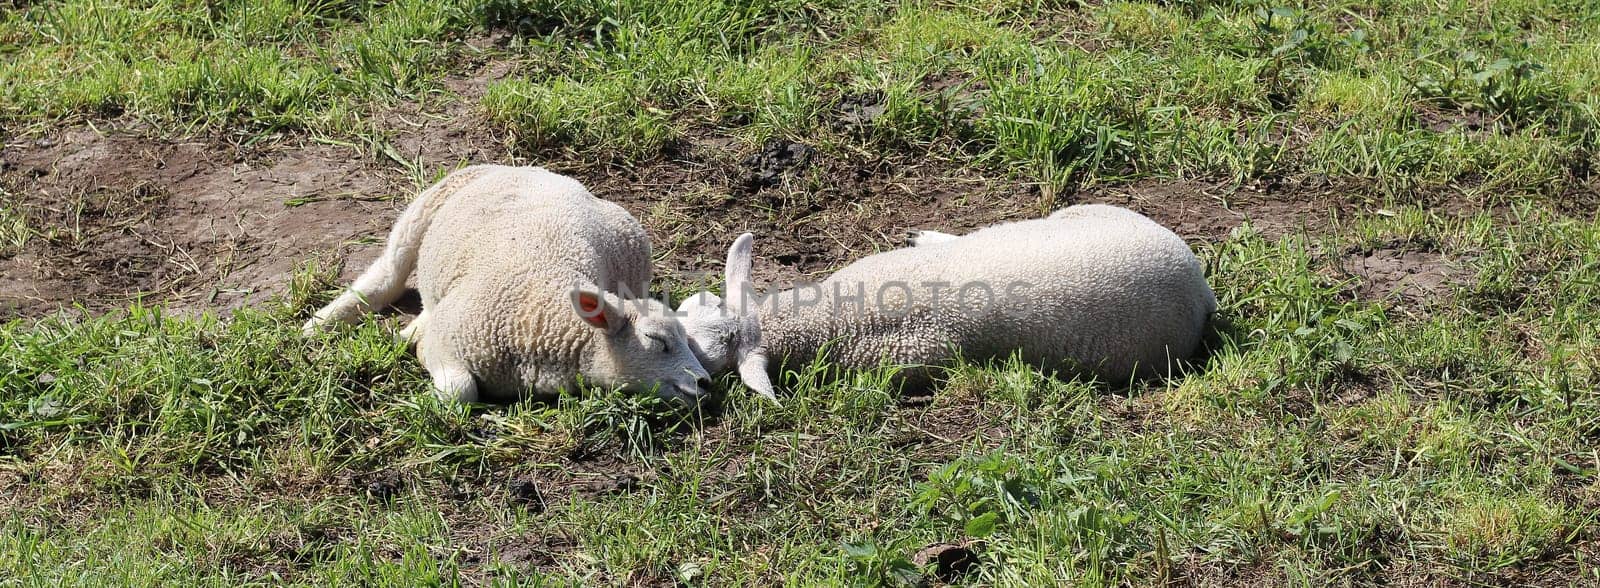 Two happy lambs with round bellies in dreamland